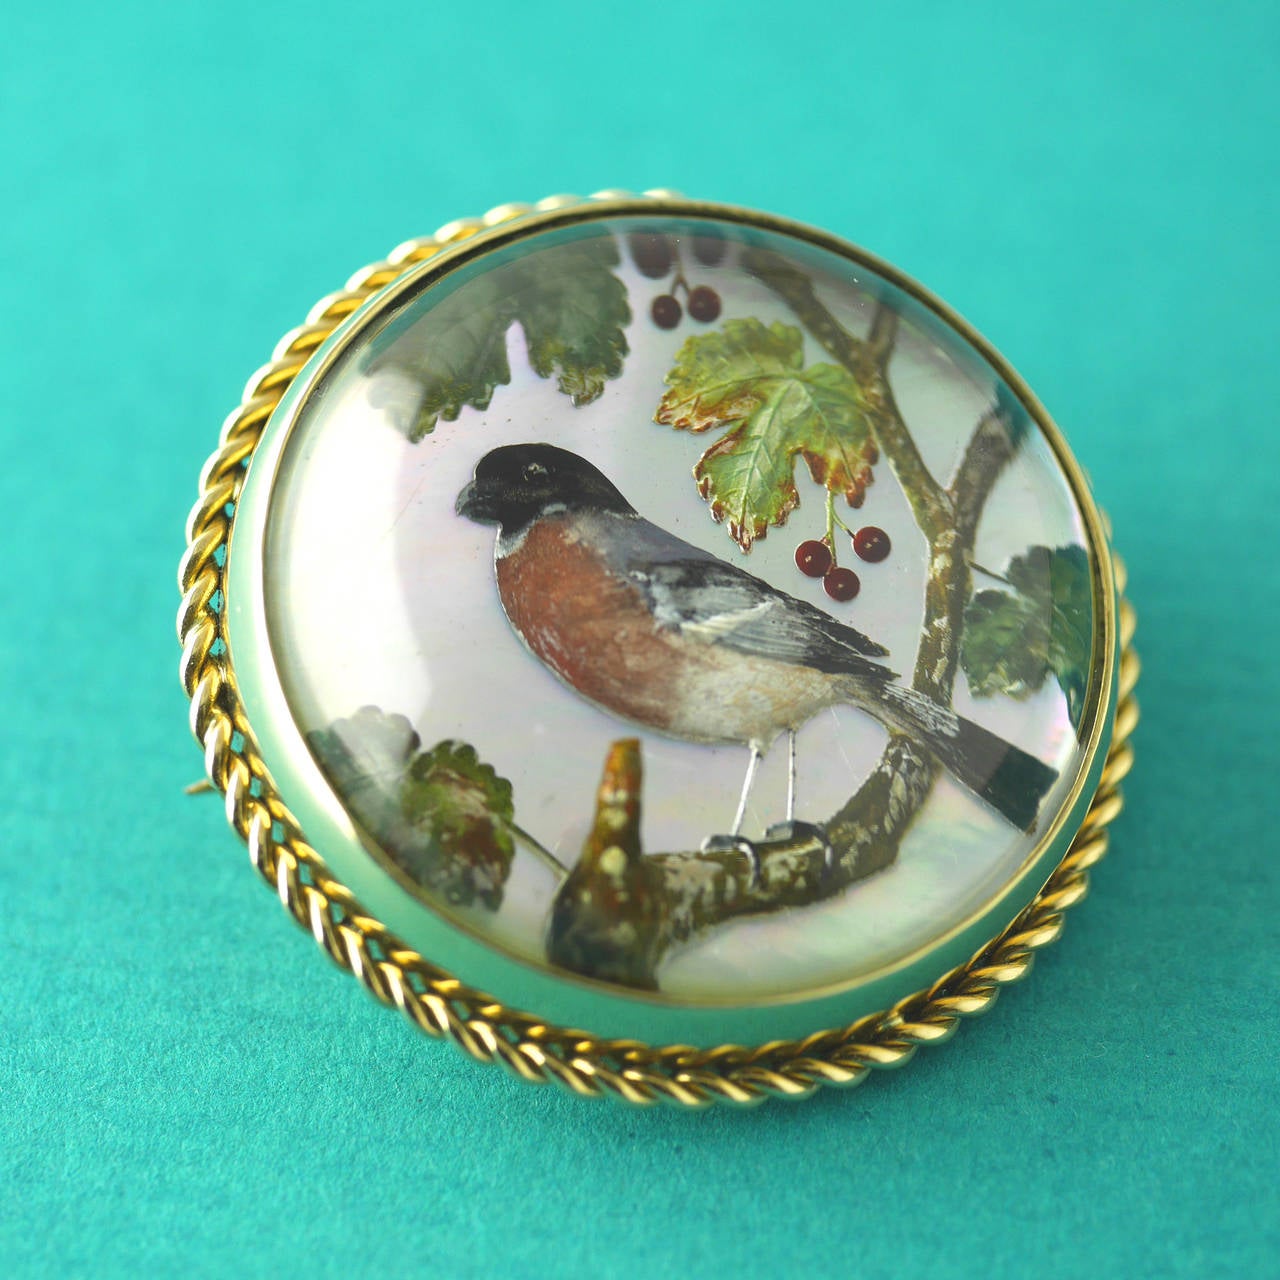 Essex crystal carved and painted showing a bird upon a cherry tree branch. Set on a mother of pearl background in 18kt gold. 

Essex Crystal or reverse intaglio are made from a cabochon (domed) crystal which has been carved from the back and then